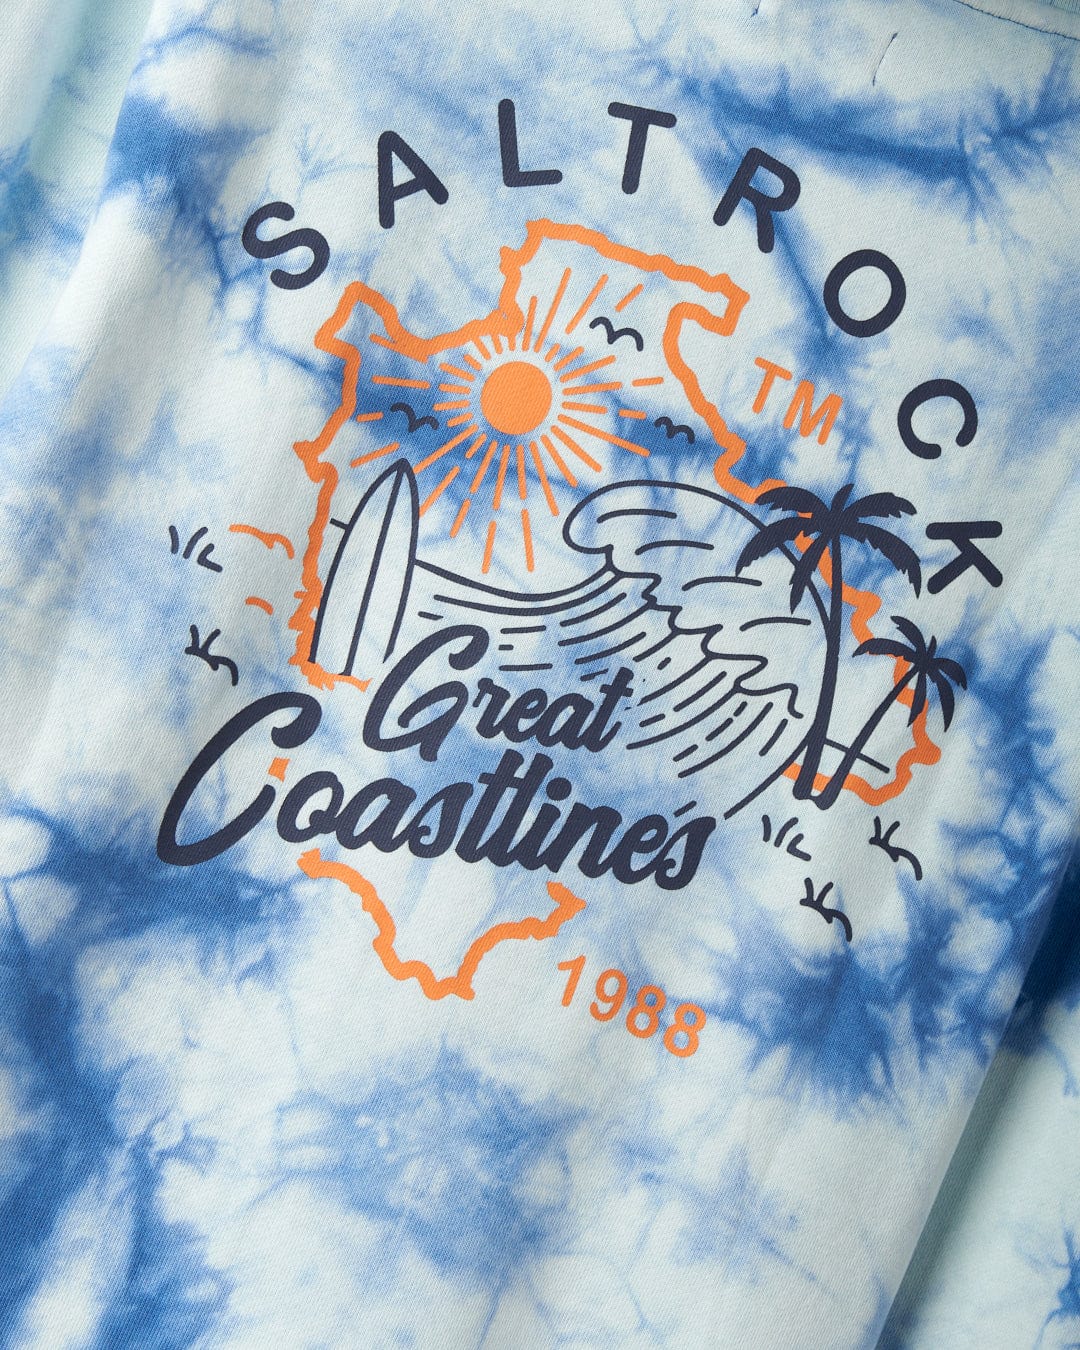 A 100% cotton hoodie featuring a design with the text "Saltrock", "Great Coastlines", and "1988", along with graphics of a sun, waves, surfboards, and palm trees, showcasing iconic Saltrock branding.